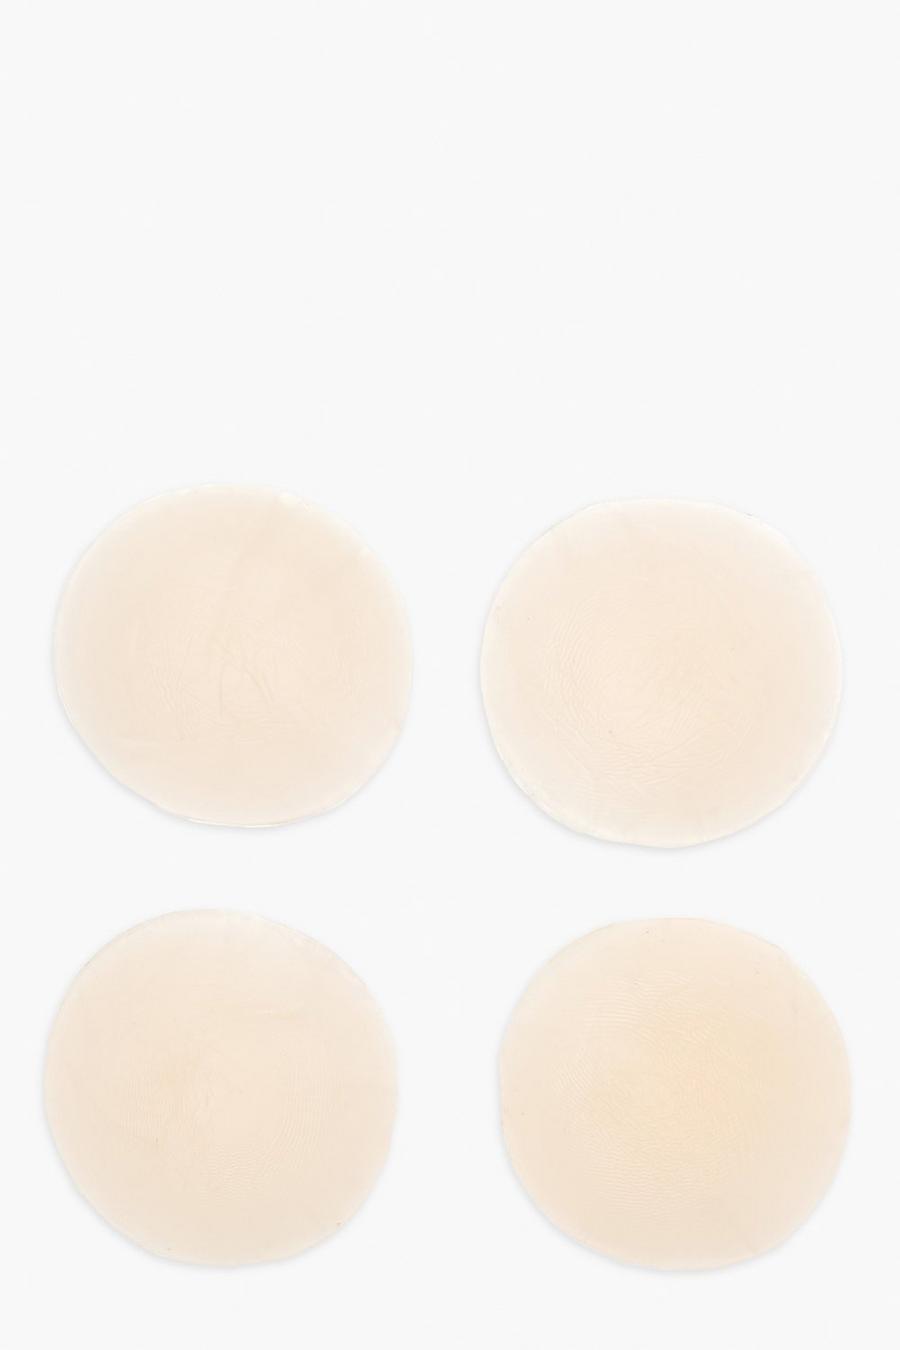 Boohoo Beauty 2er-Pack Silikon Nippelcover, Natural beige